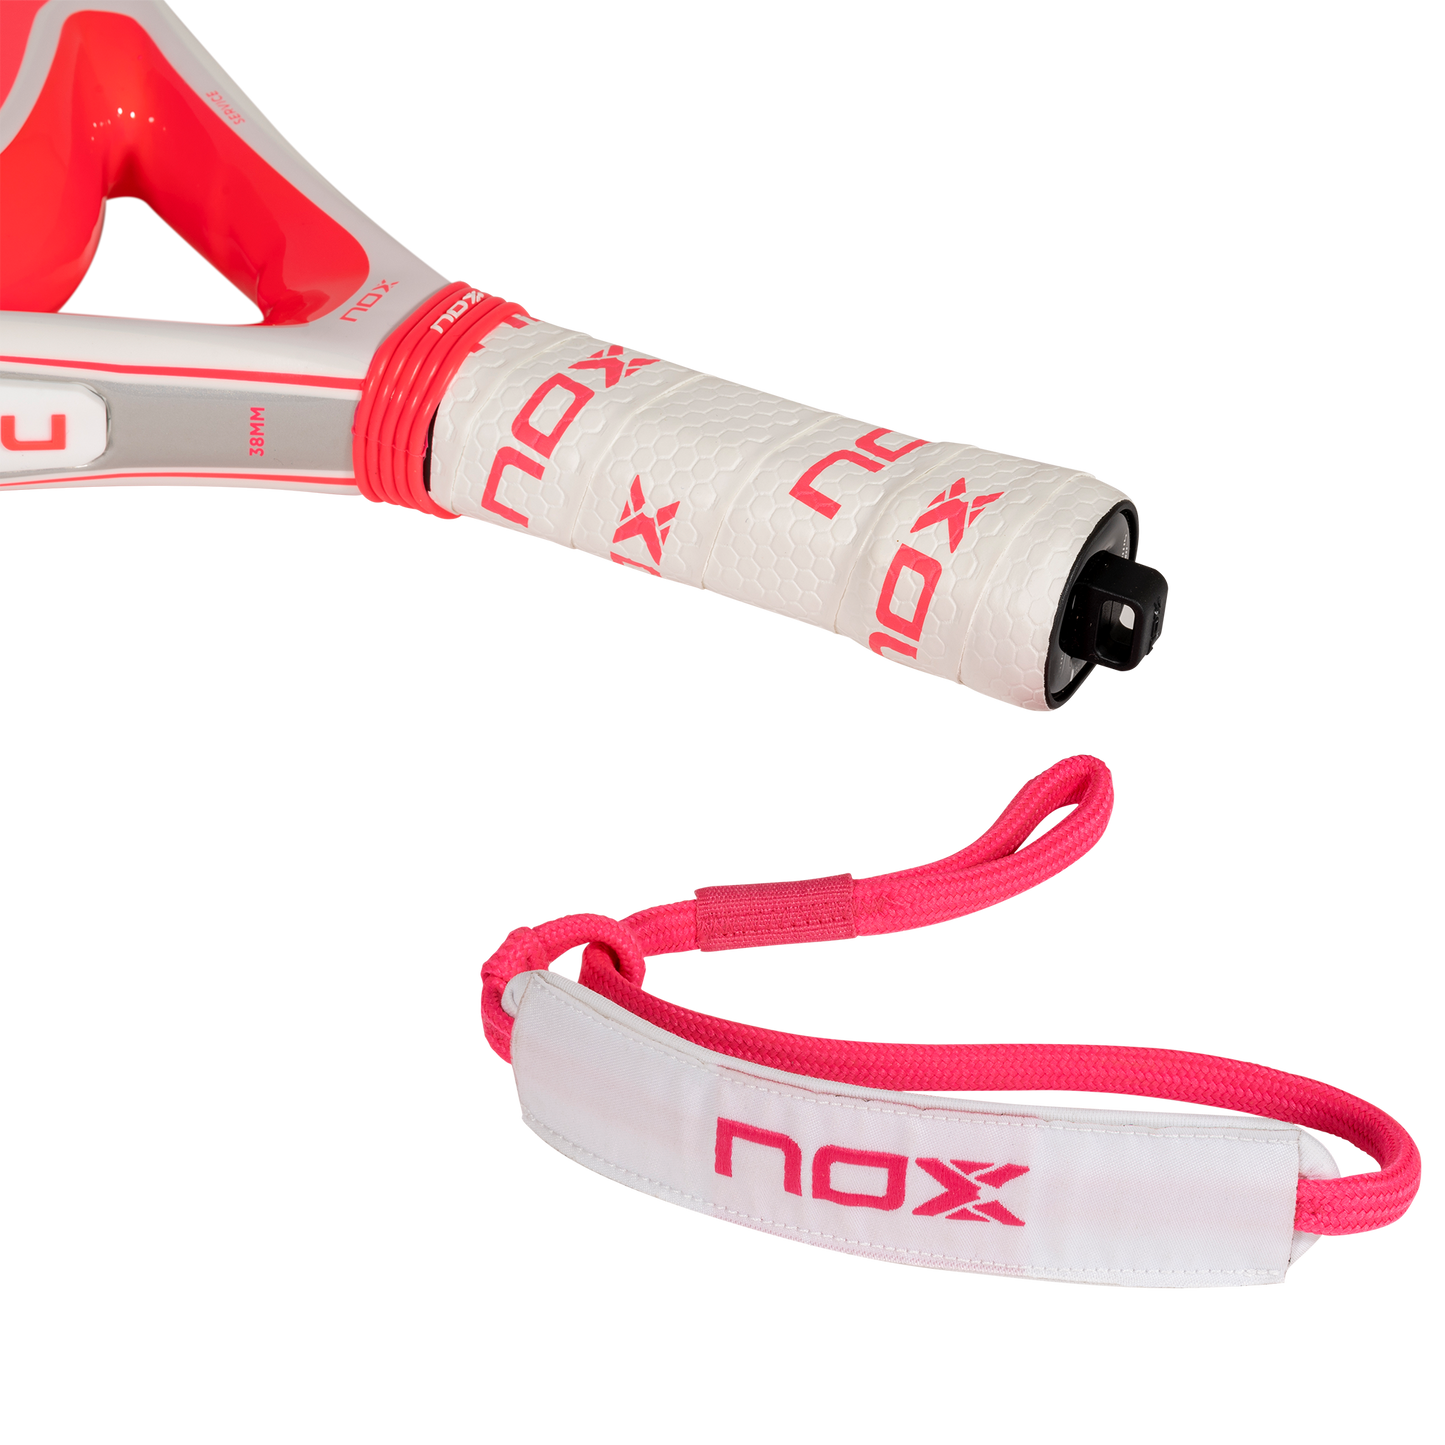 the smartstrap of the Nox Equation Lady Light Advanced padel racket 2024 on sale at thepadelshop.co.nz